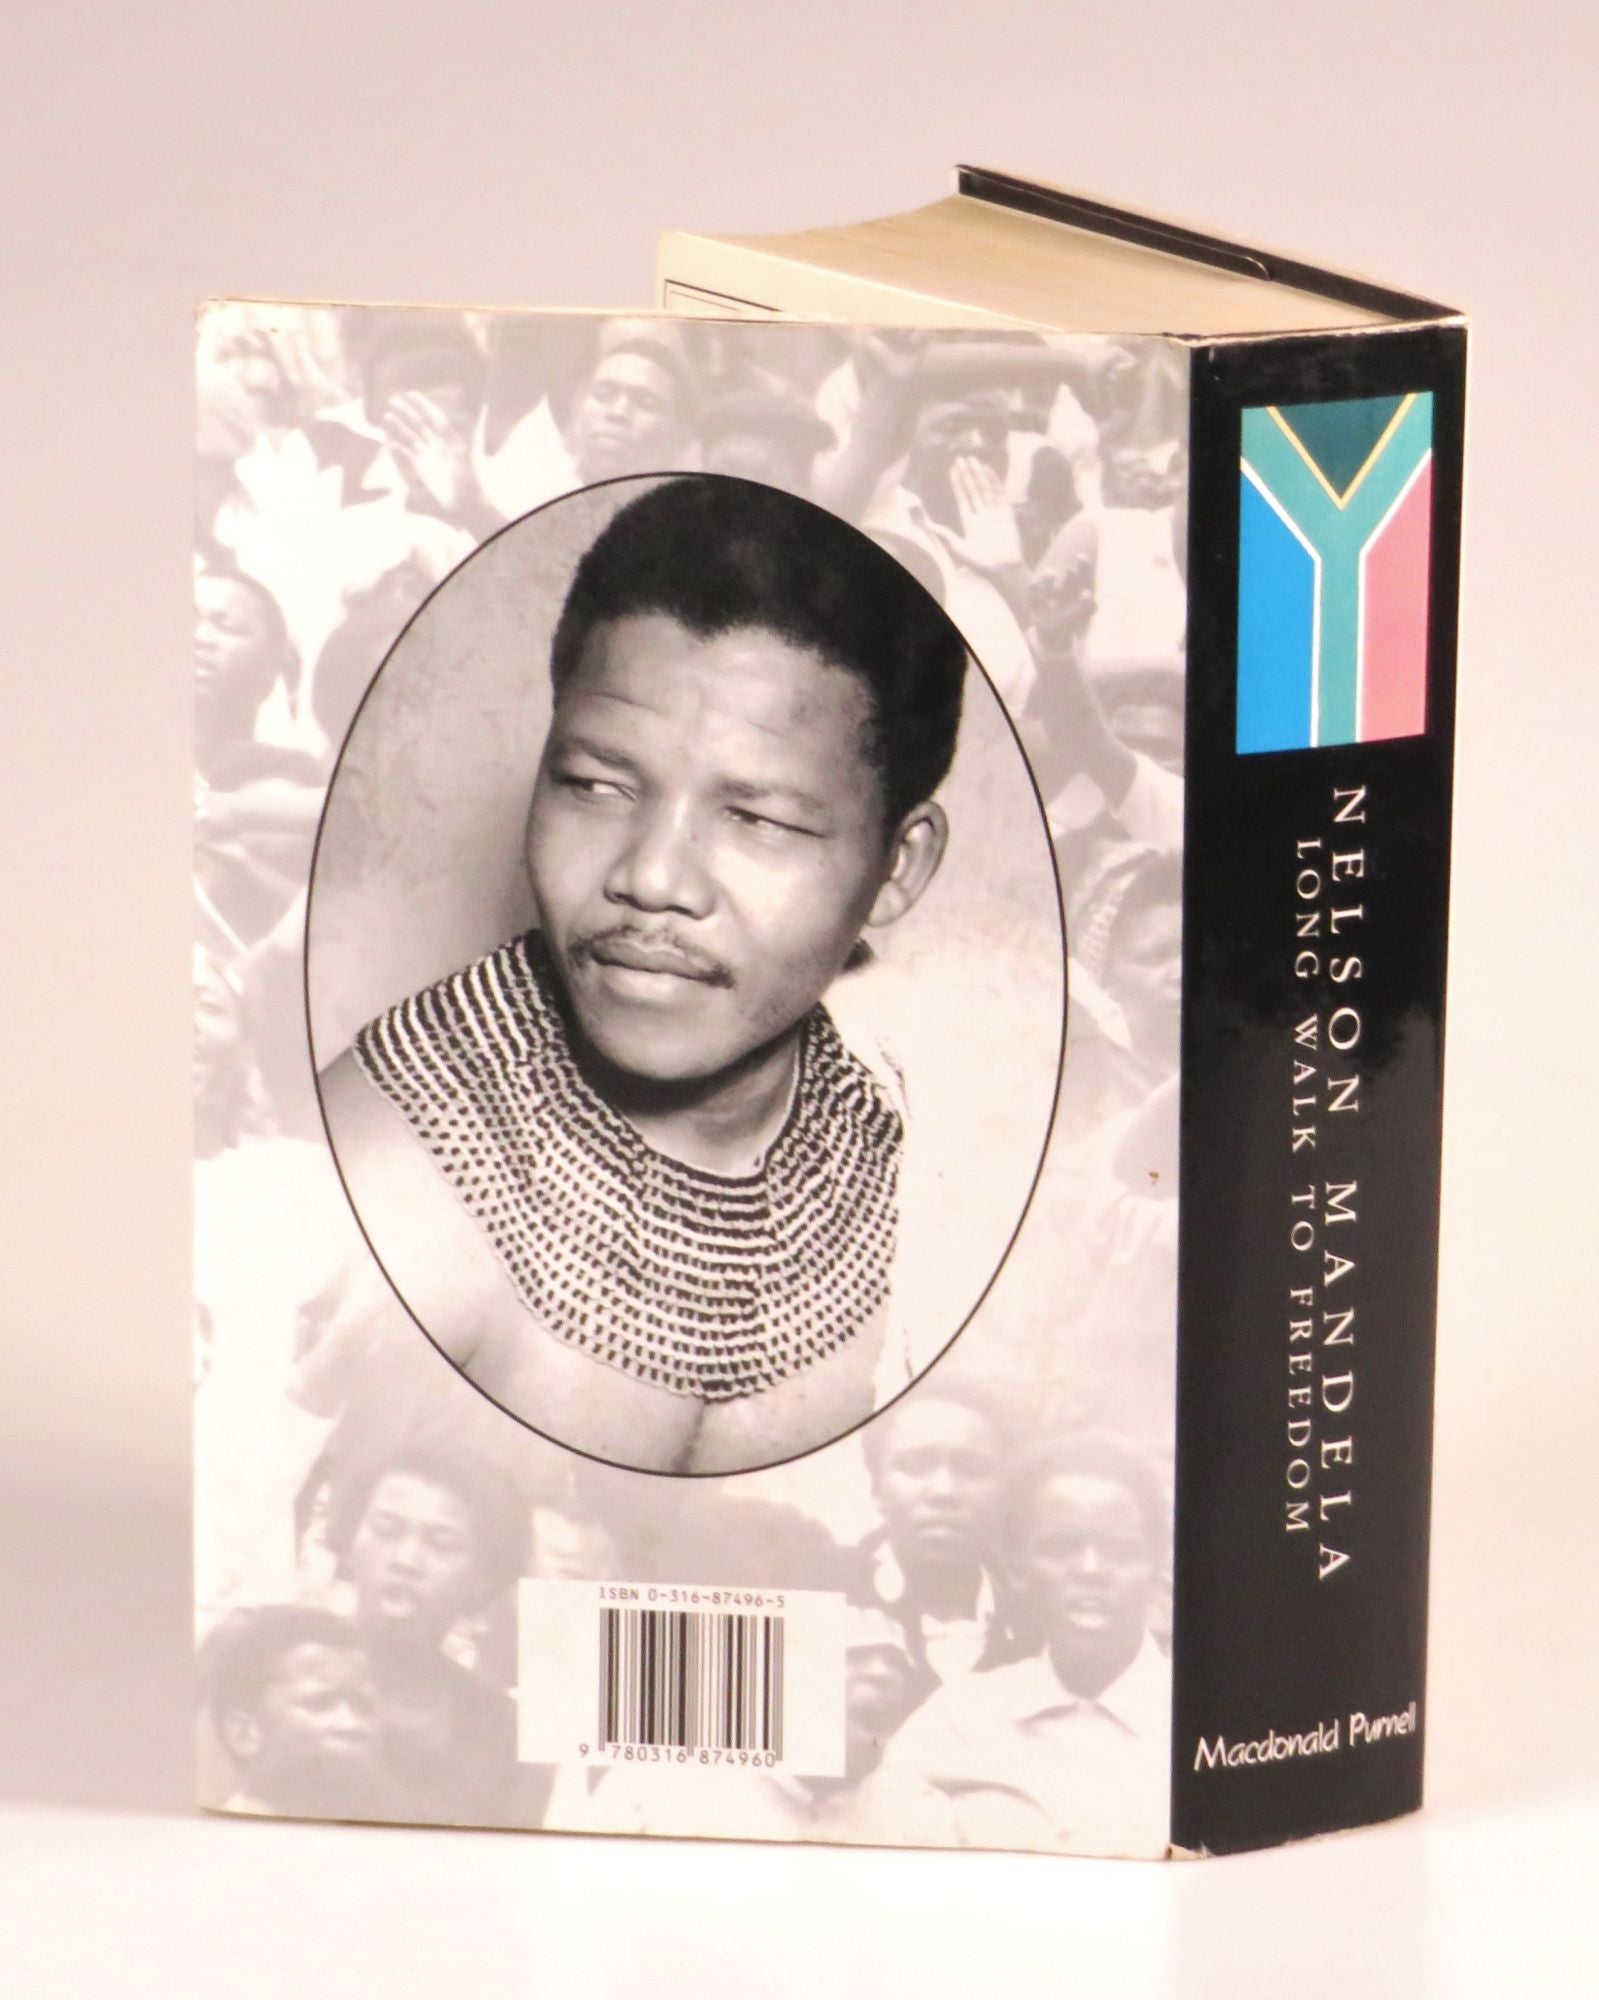 Long Walk to Freedom, the South African first edition, inscribed and dated  by Nelson Mandela, Nelson Mandela